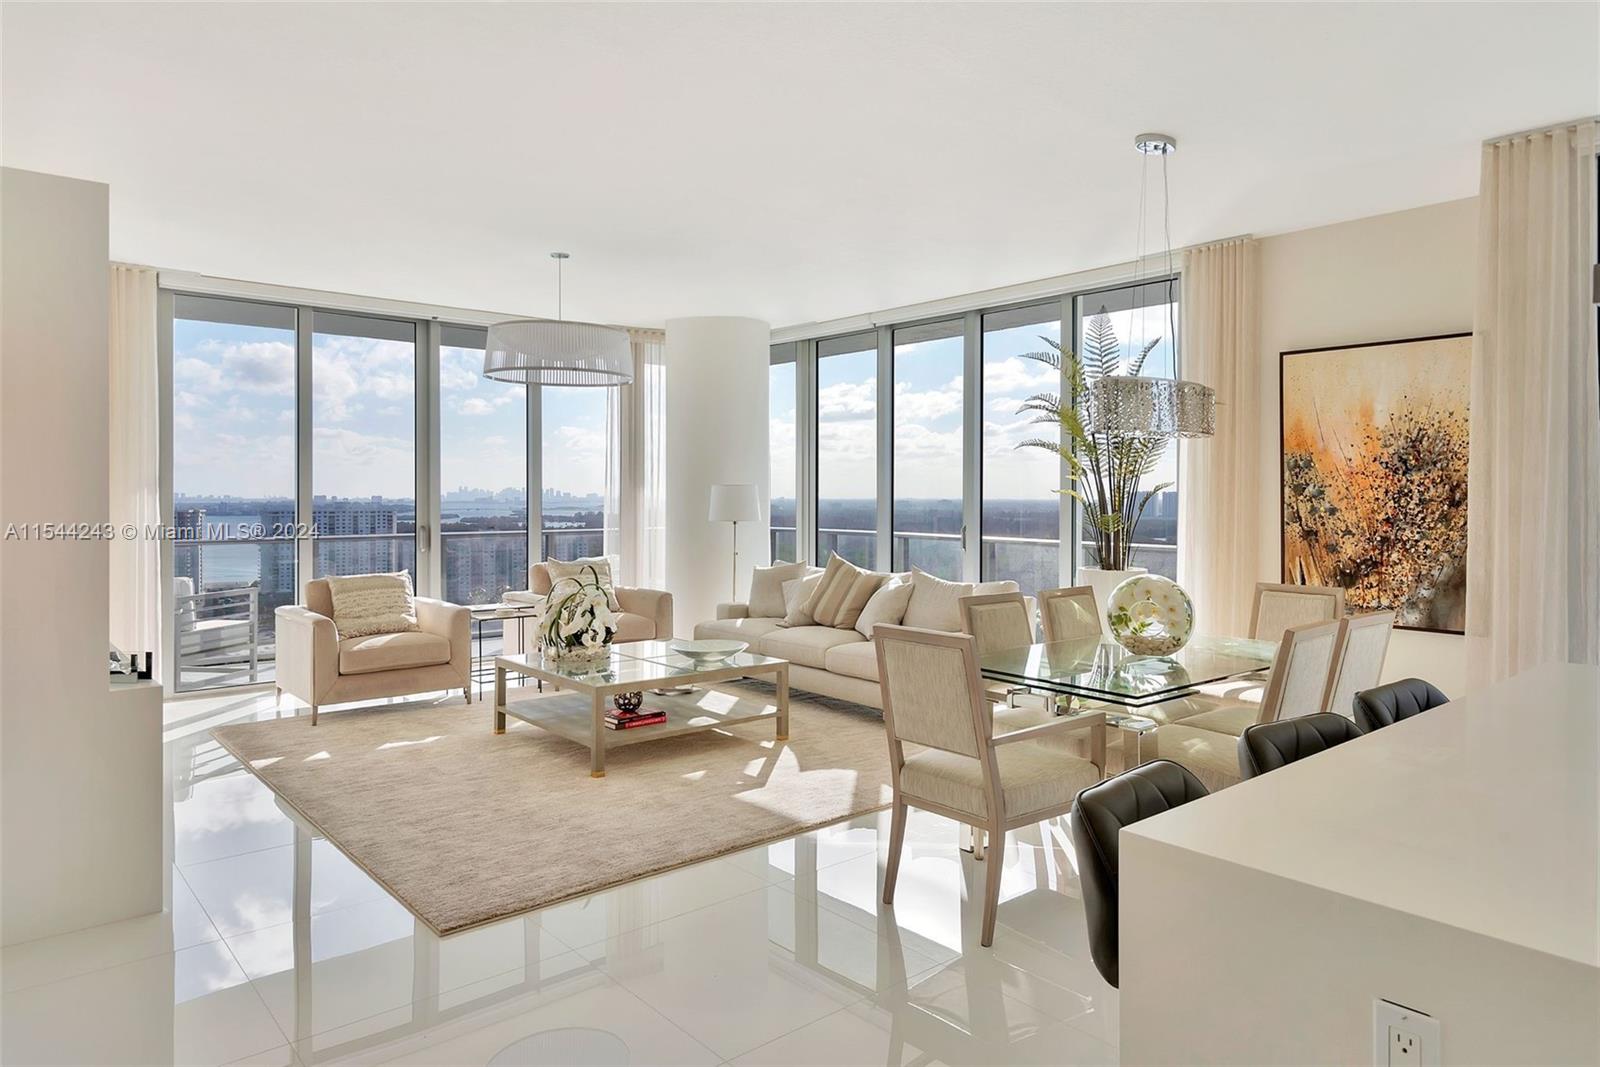 Property for Sale at 300 Sunny Isles Blvd 4-2508, Sunny Isles Beach, Miami-Dade County, Florida - Bedrooms: 3 
Bathrooms: 4  - $1,890,000